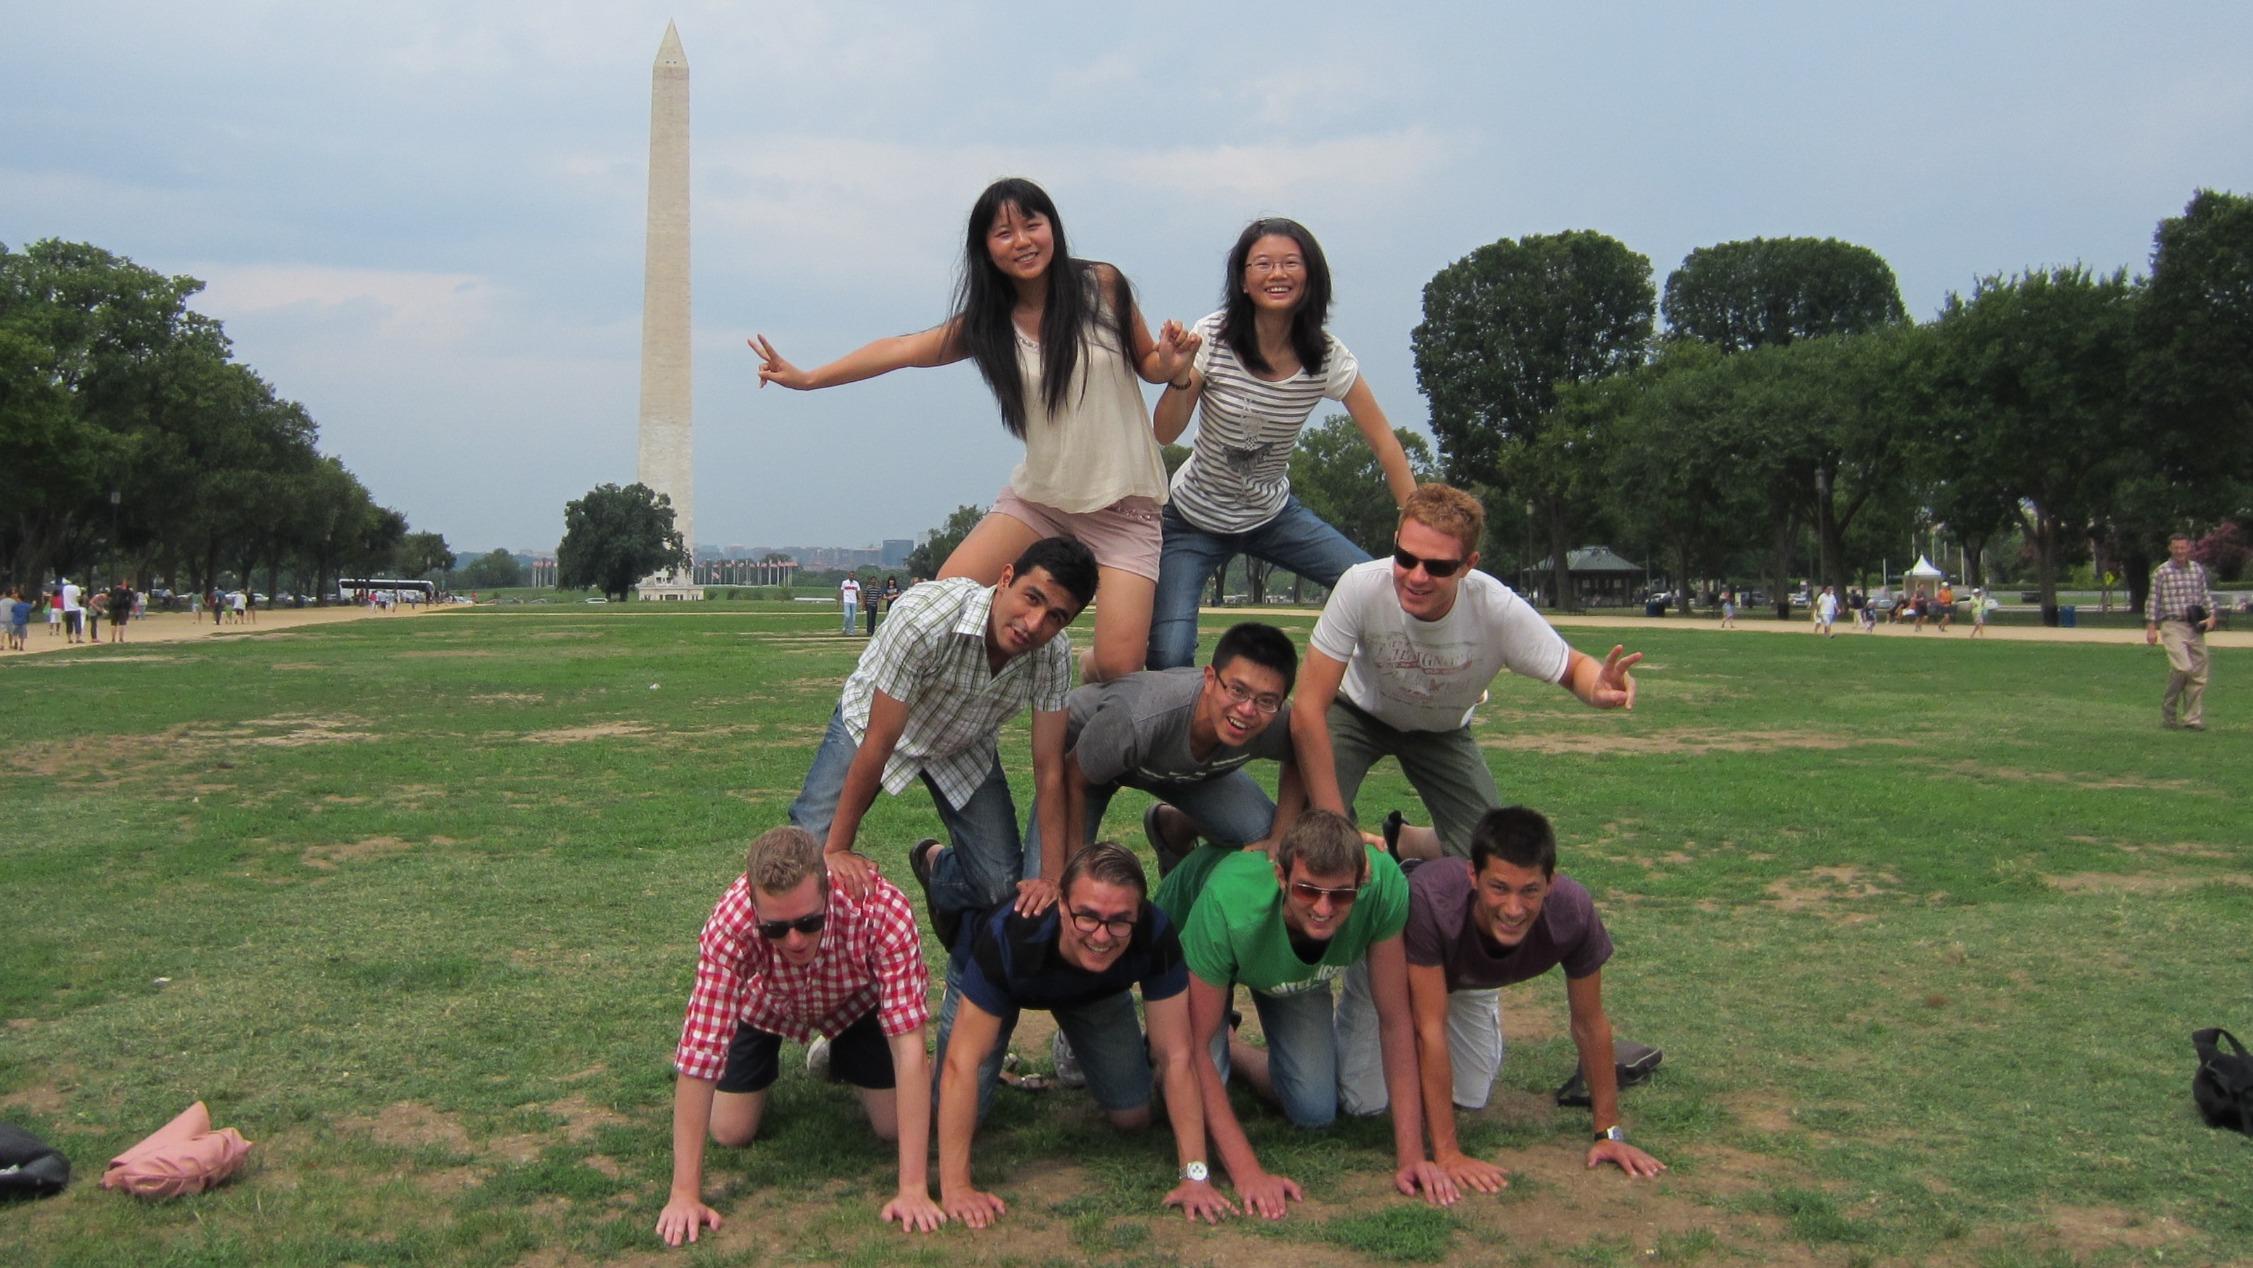 Students form a human pyramid in front of the Washington Monument.